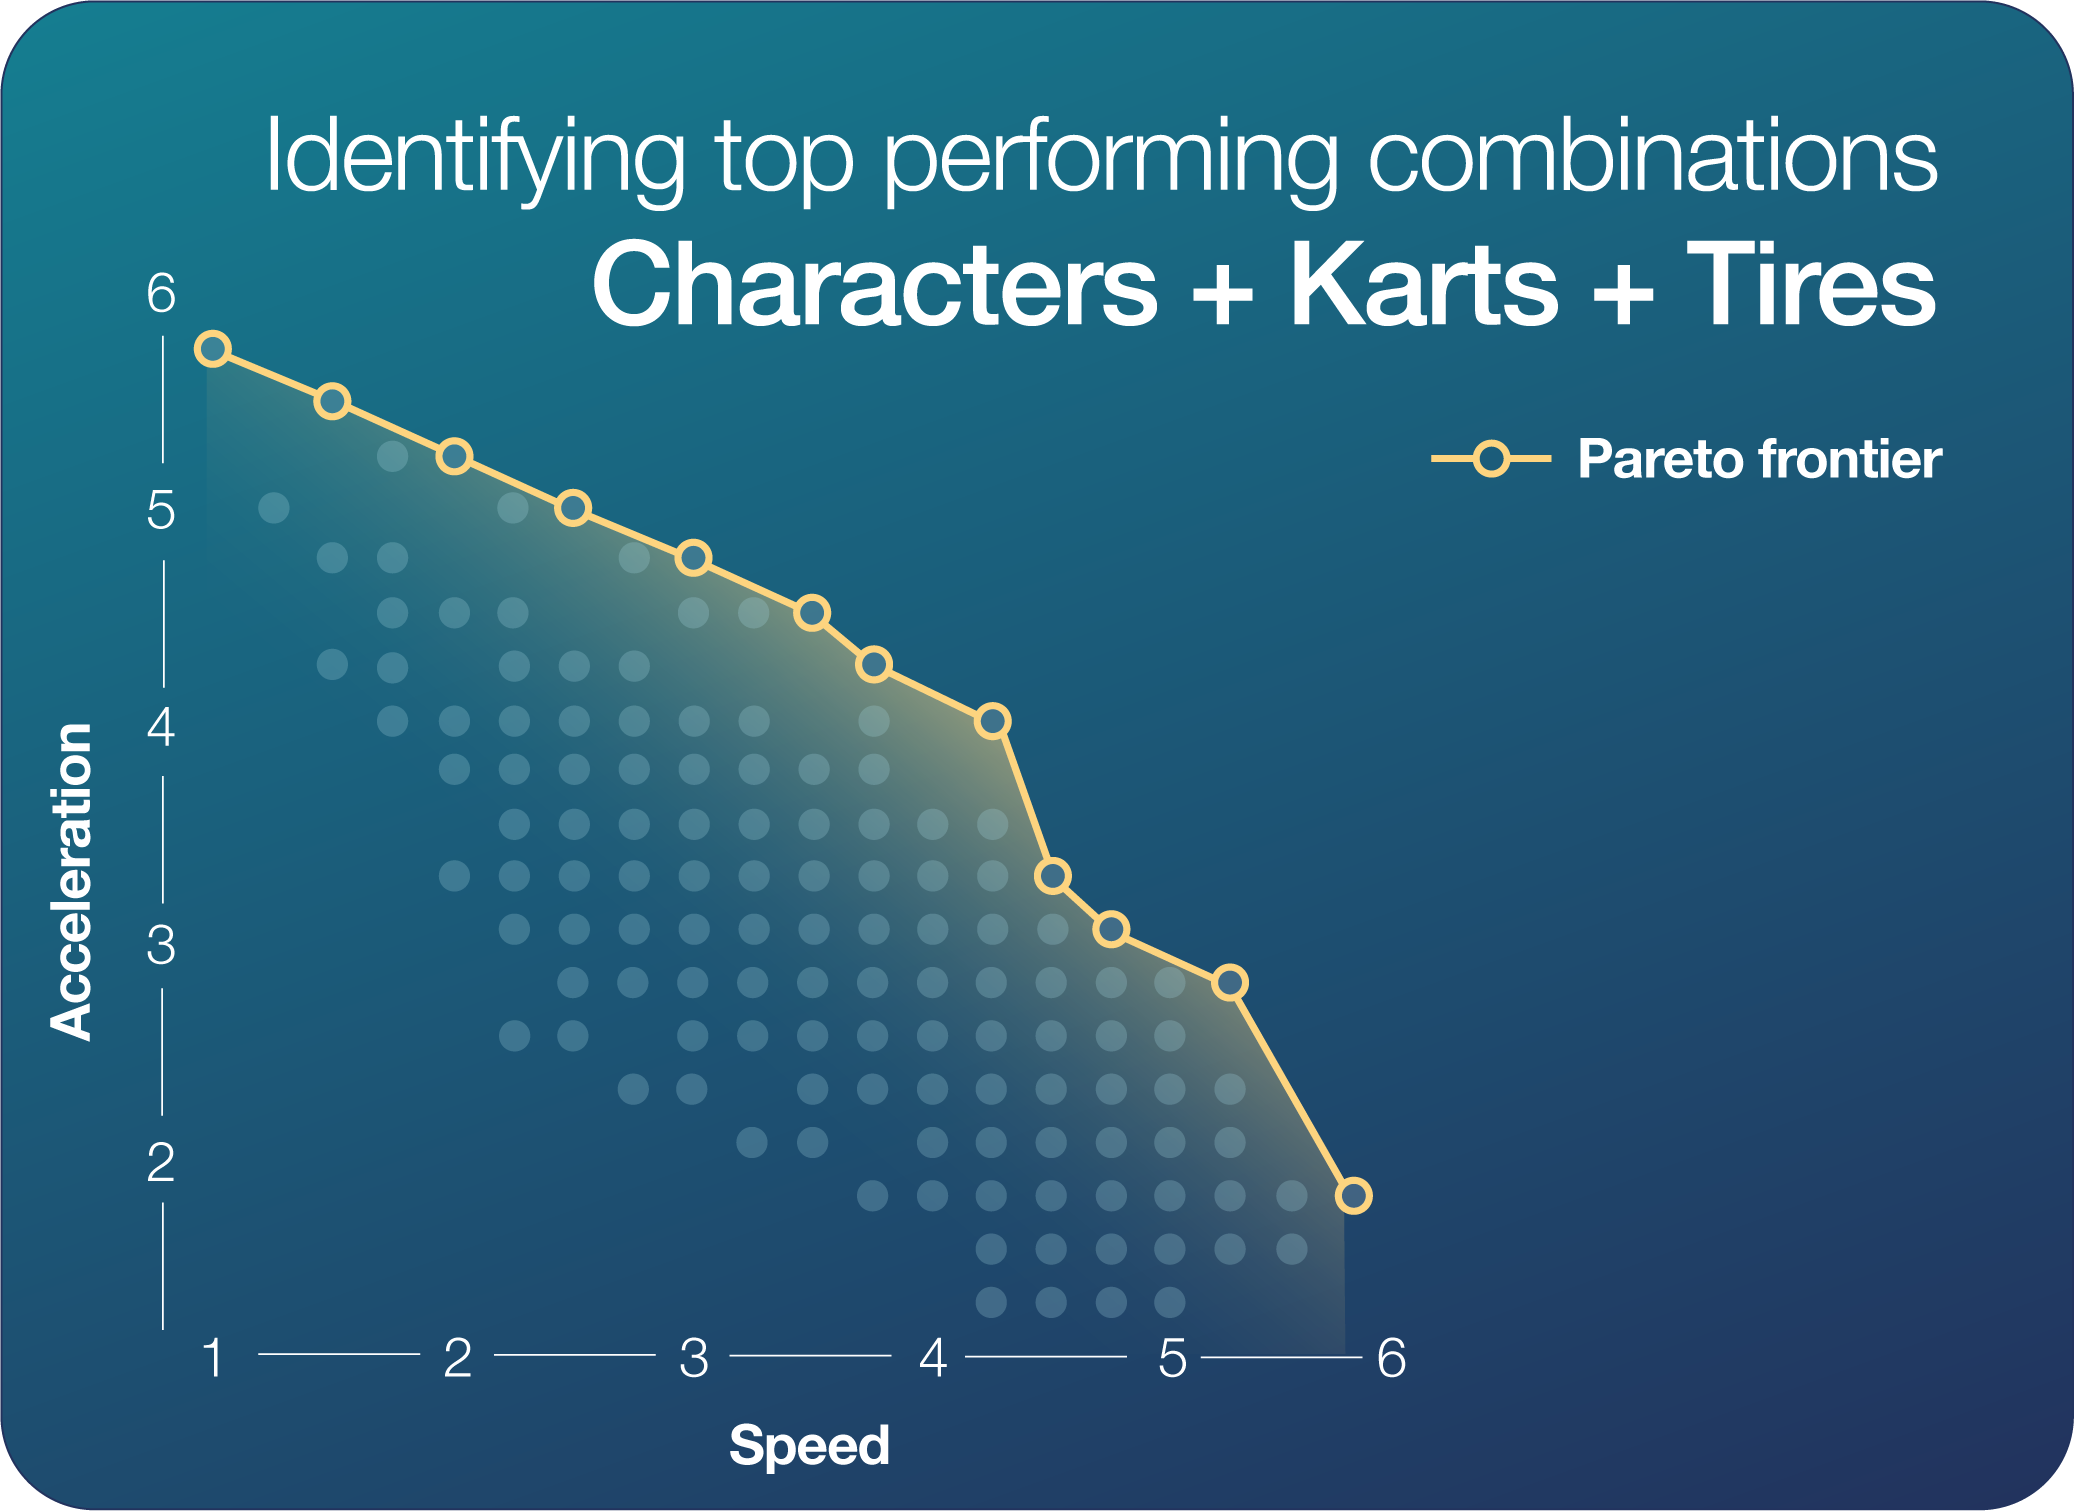 Visualization of how combining these stats (Characters + Karts + Tires) can give you a Pareto frontier